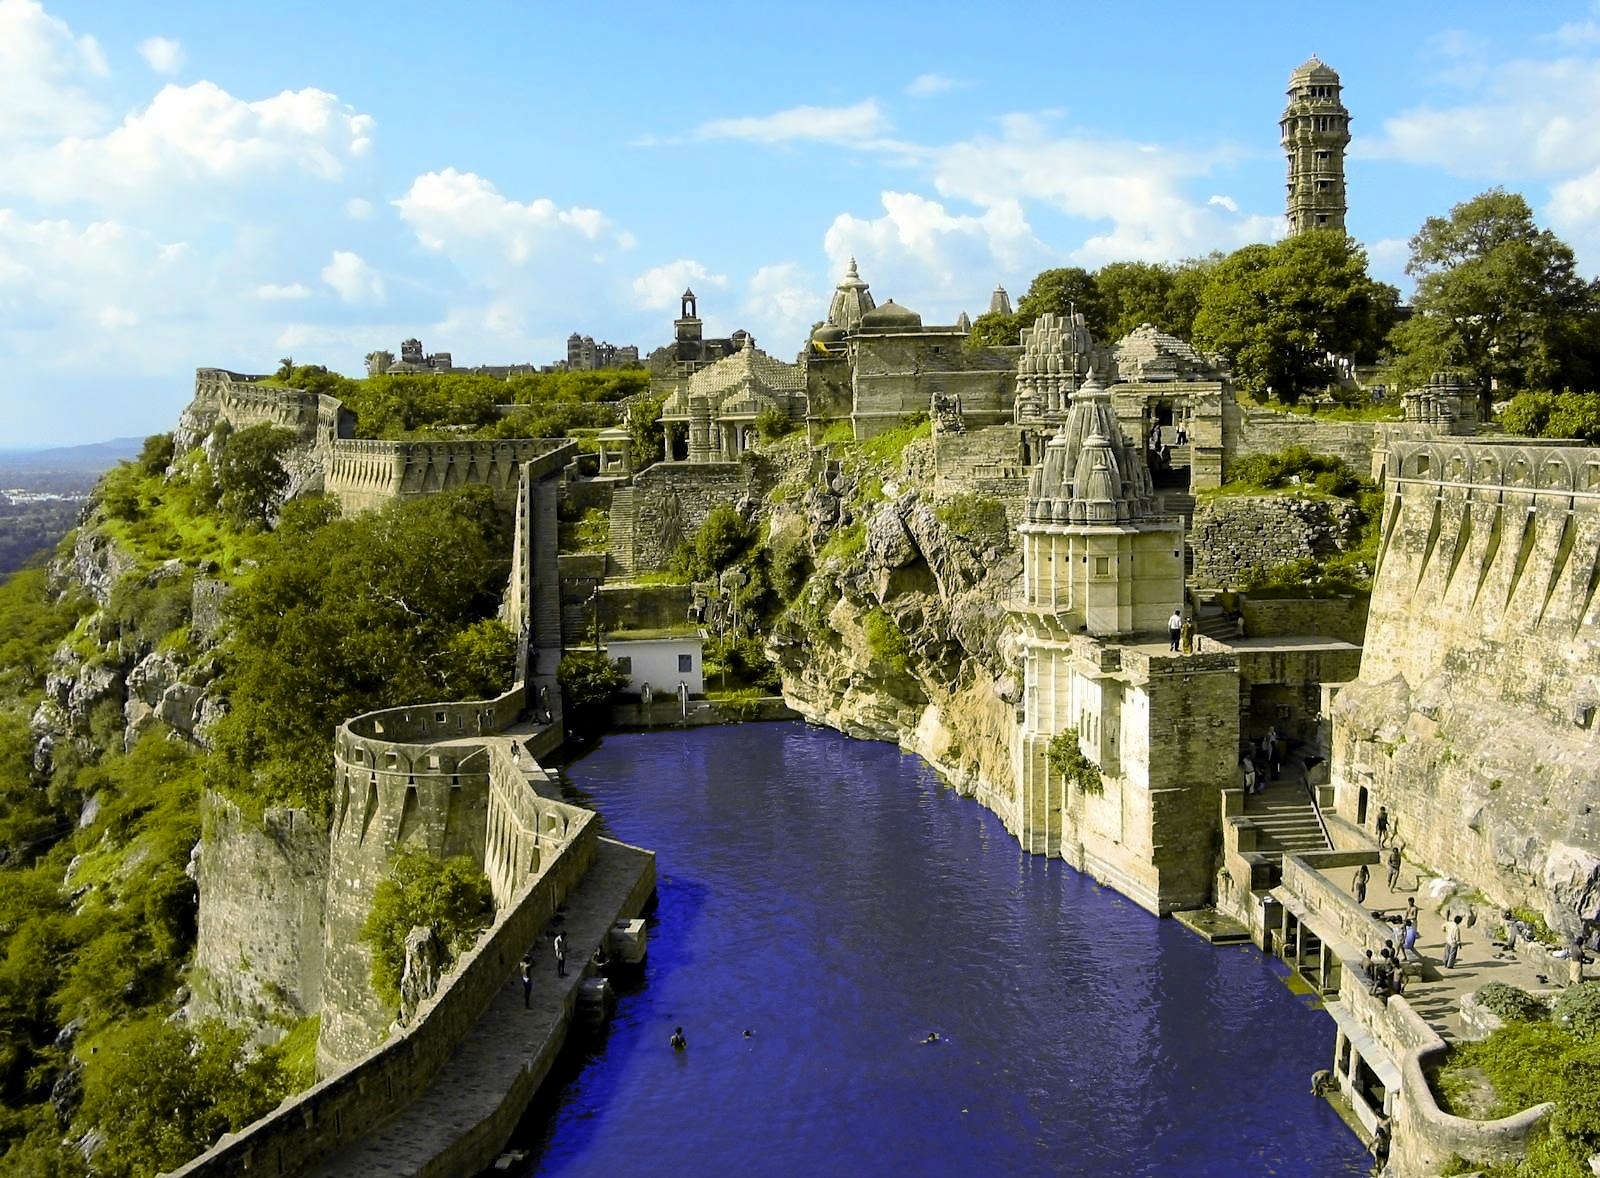 Chittorgarh city in India with ruins, mountains, and a river.